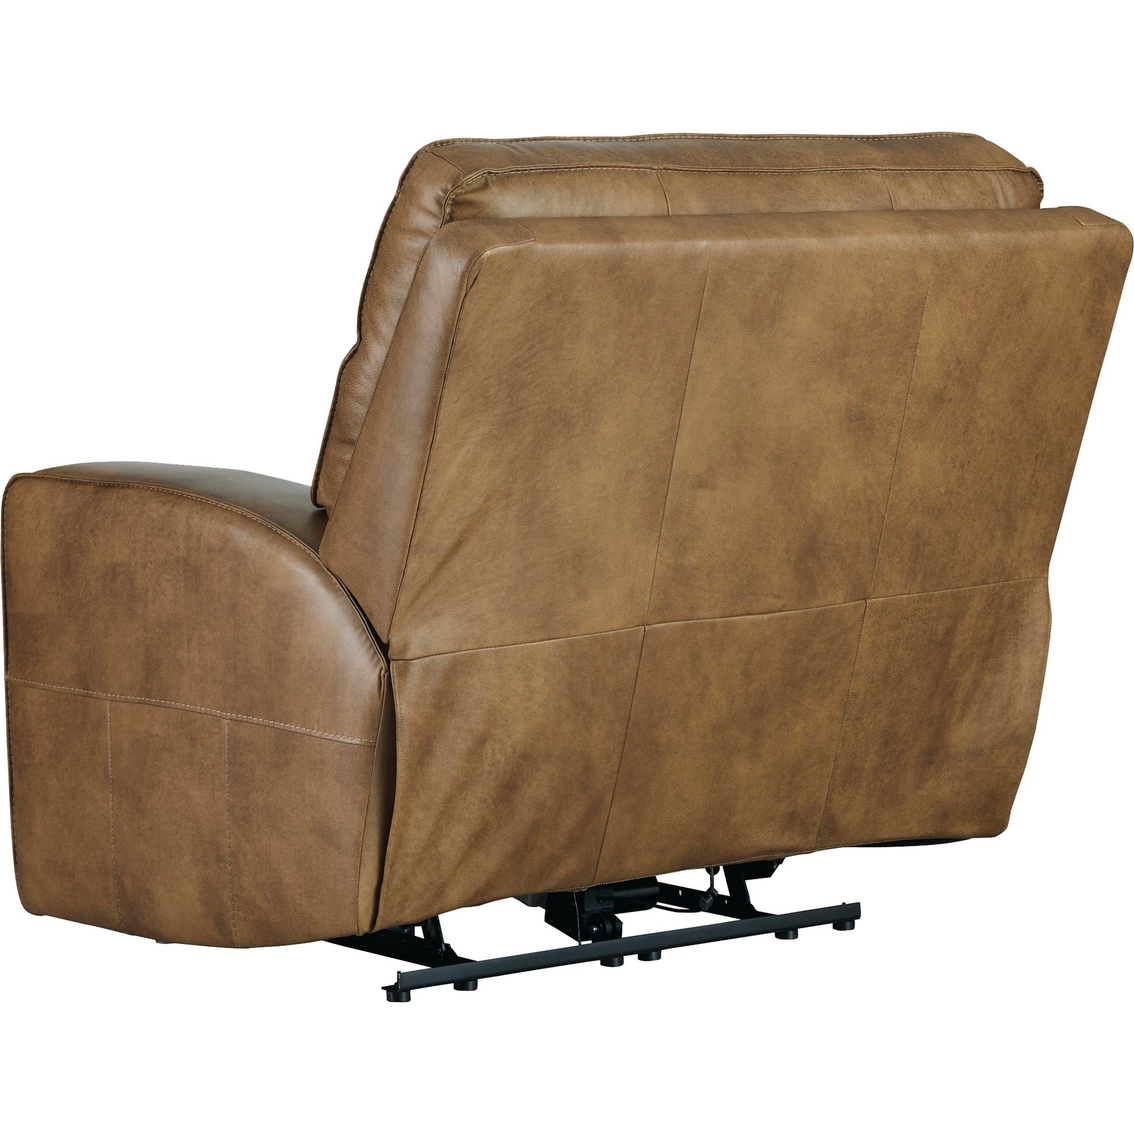 Signature Design by Ashley Game Plan Oversized Power Recliner - Image 4 of 9